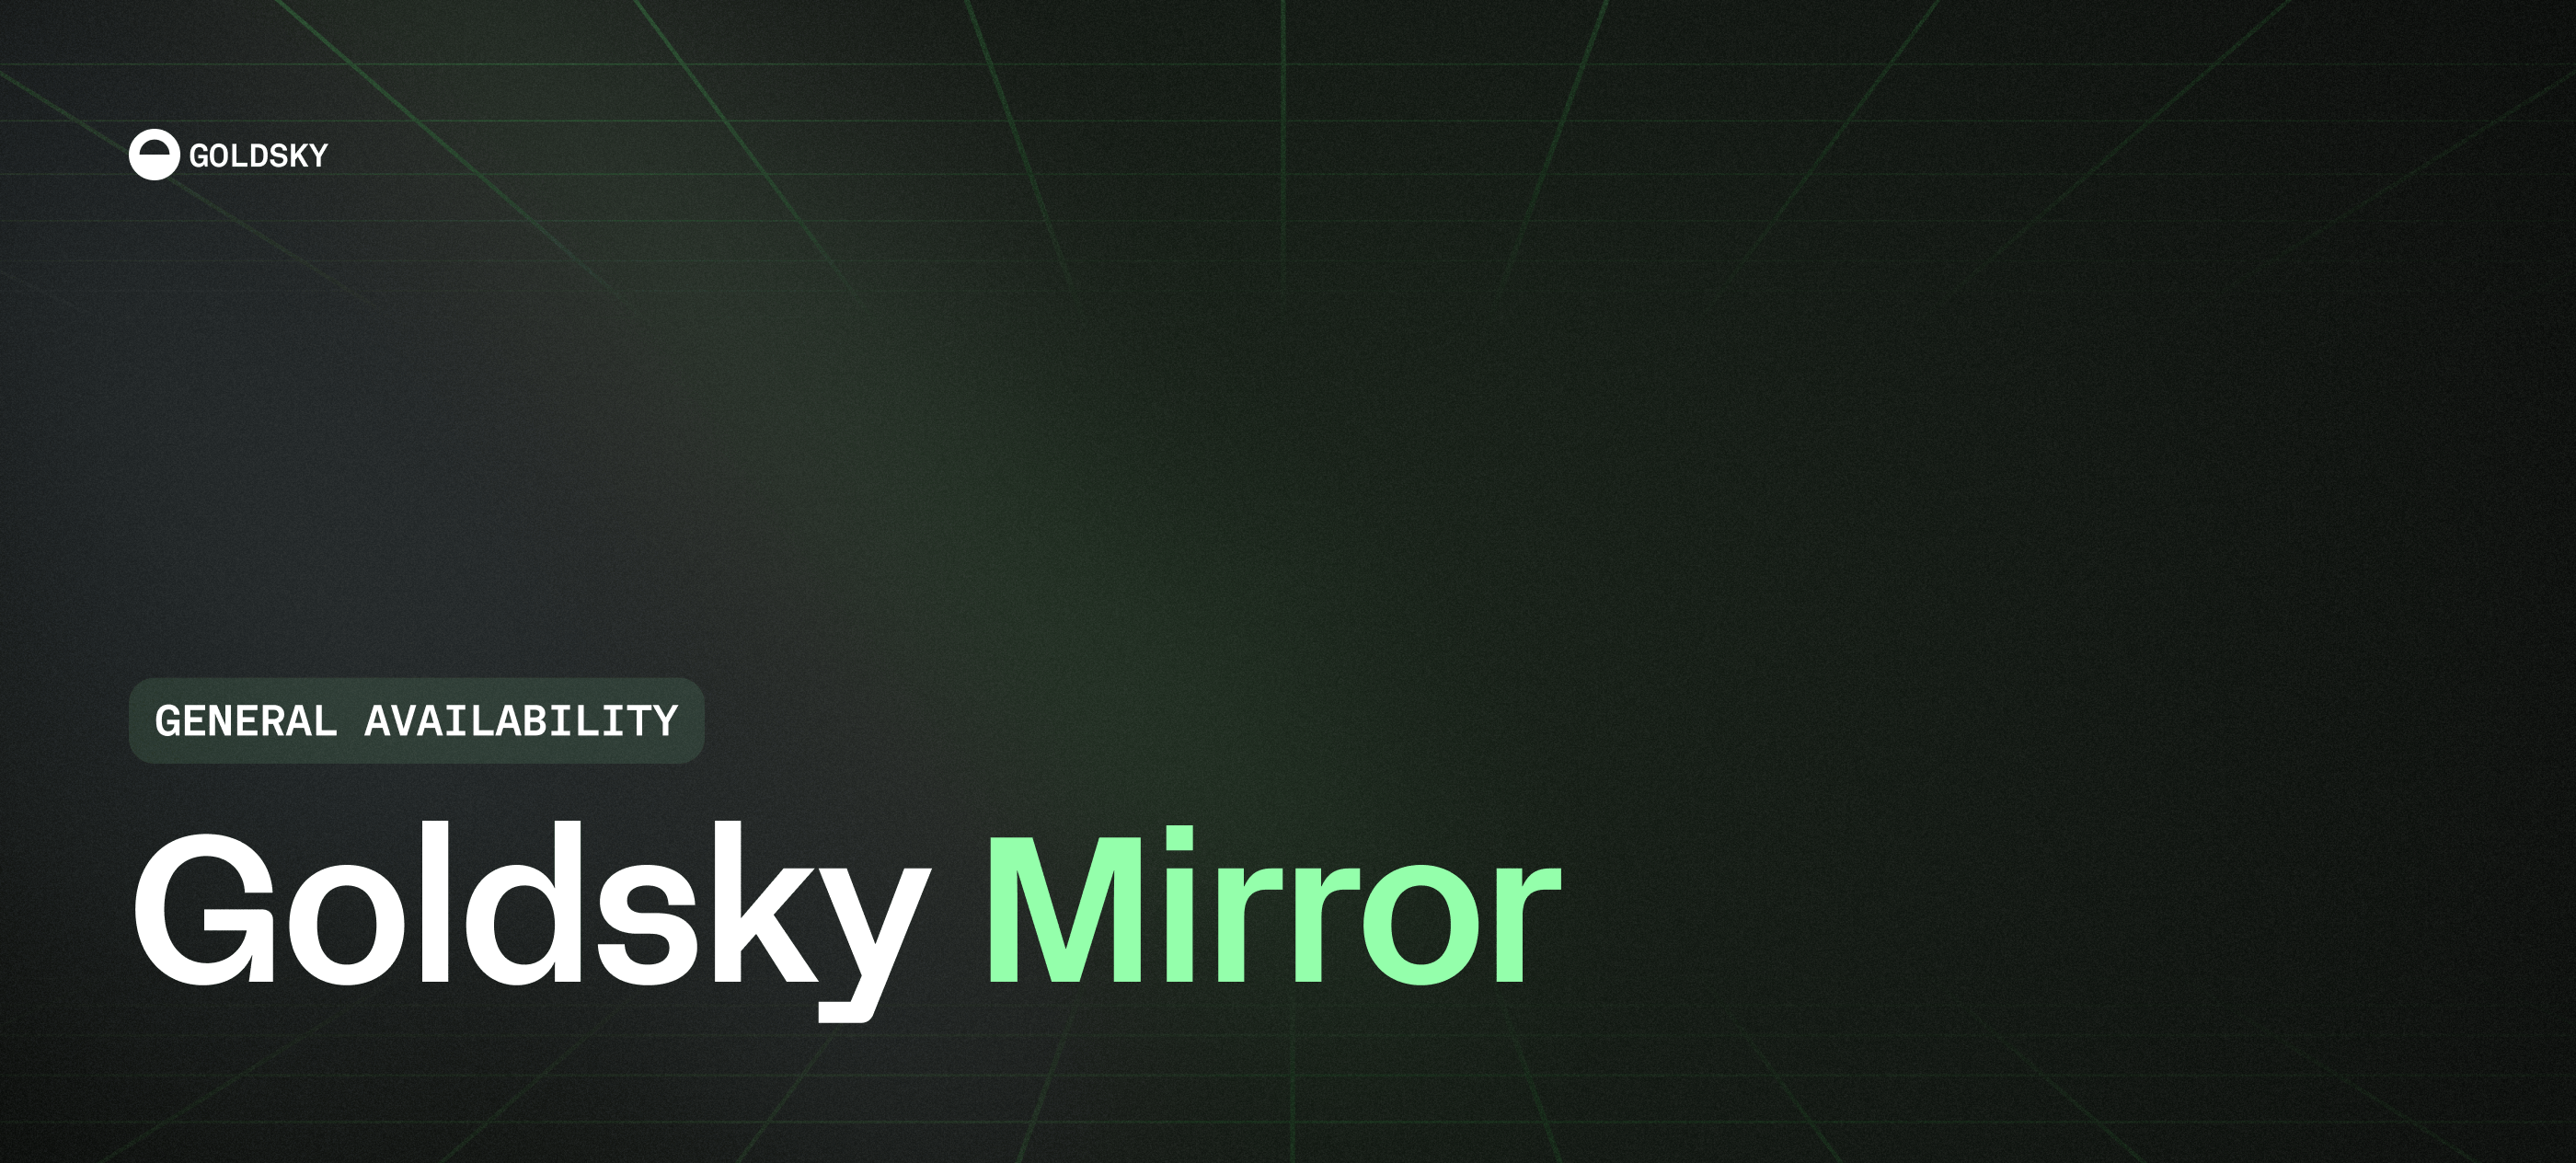 Goldsky Mirror is now generally available cover image